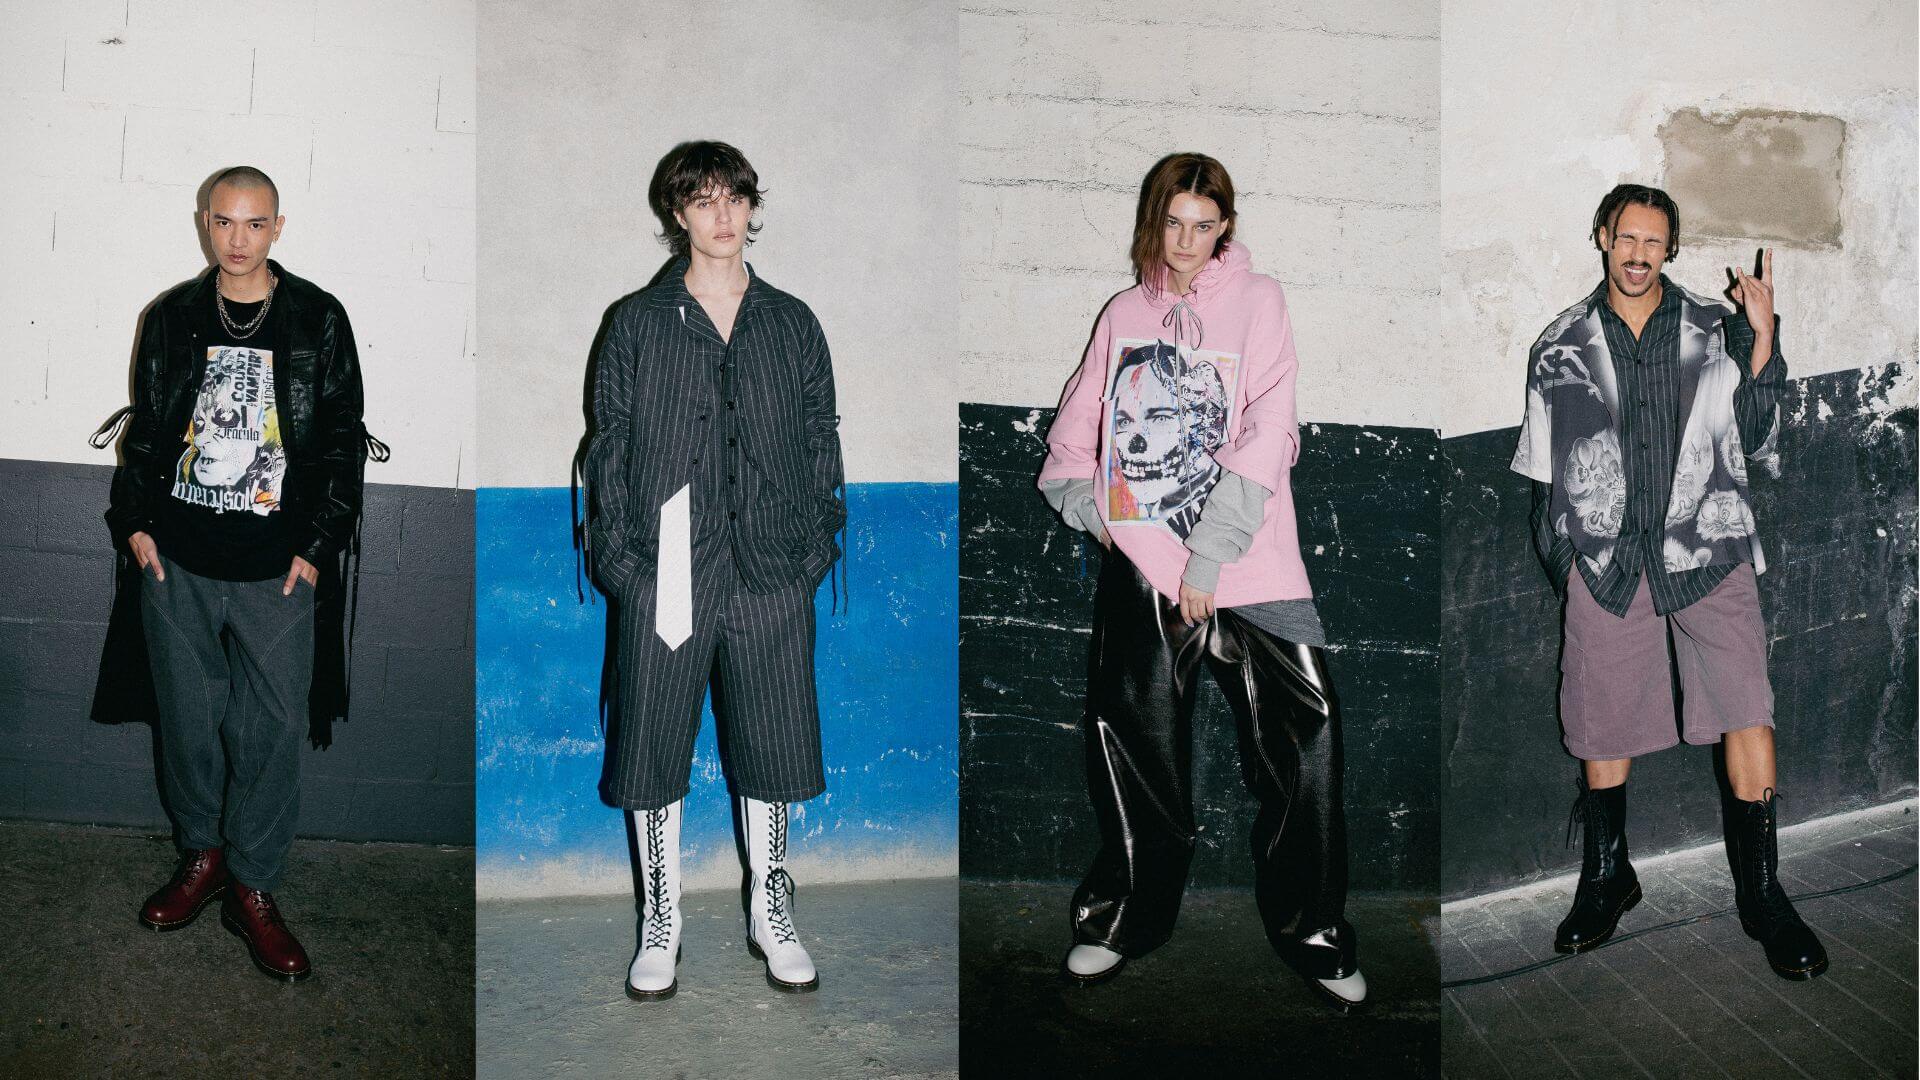 A showcase of four individuals wearing urban streetwear, exhibiting a mix of bold prints, oversized garments, and eclectic styles.